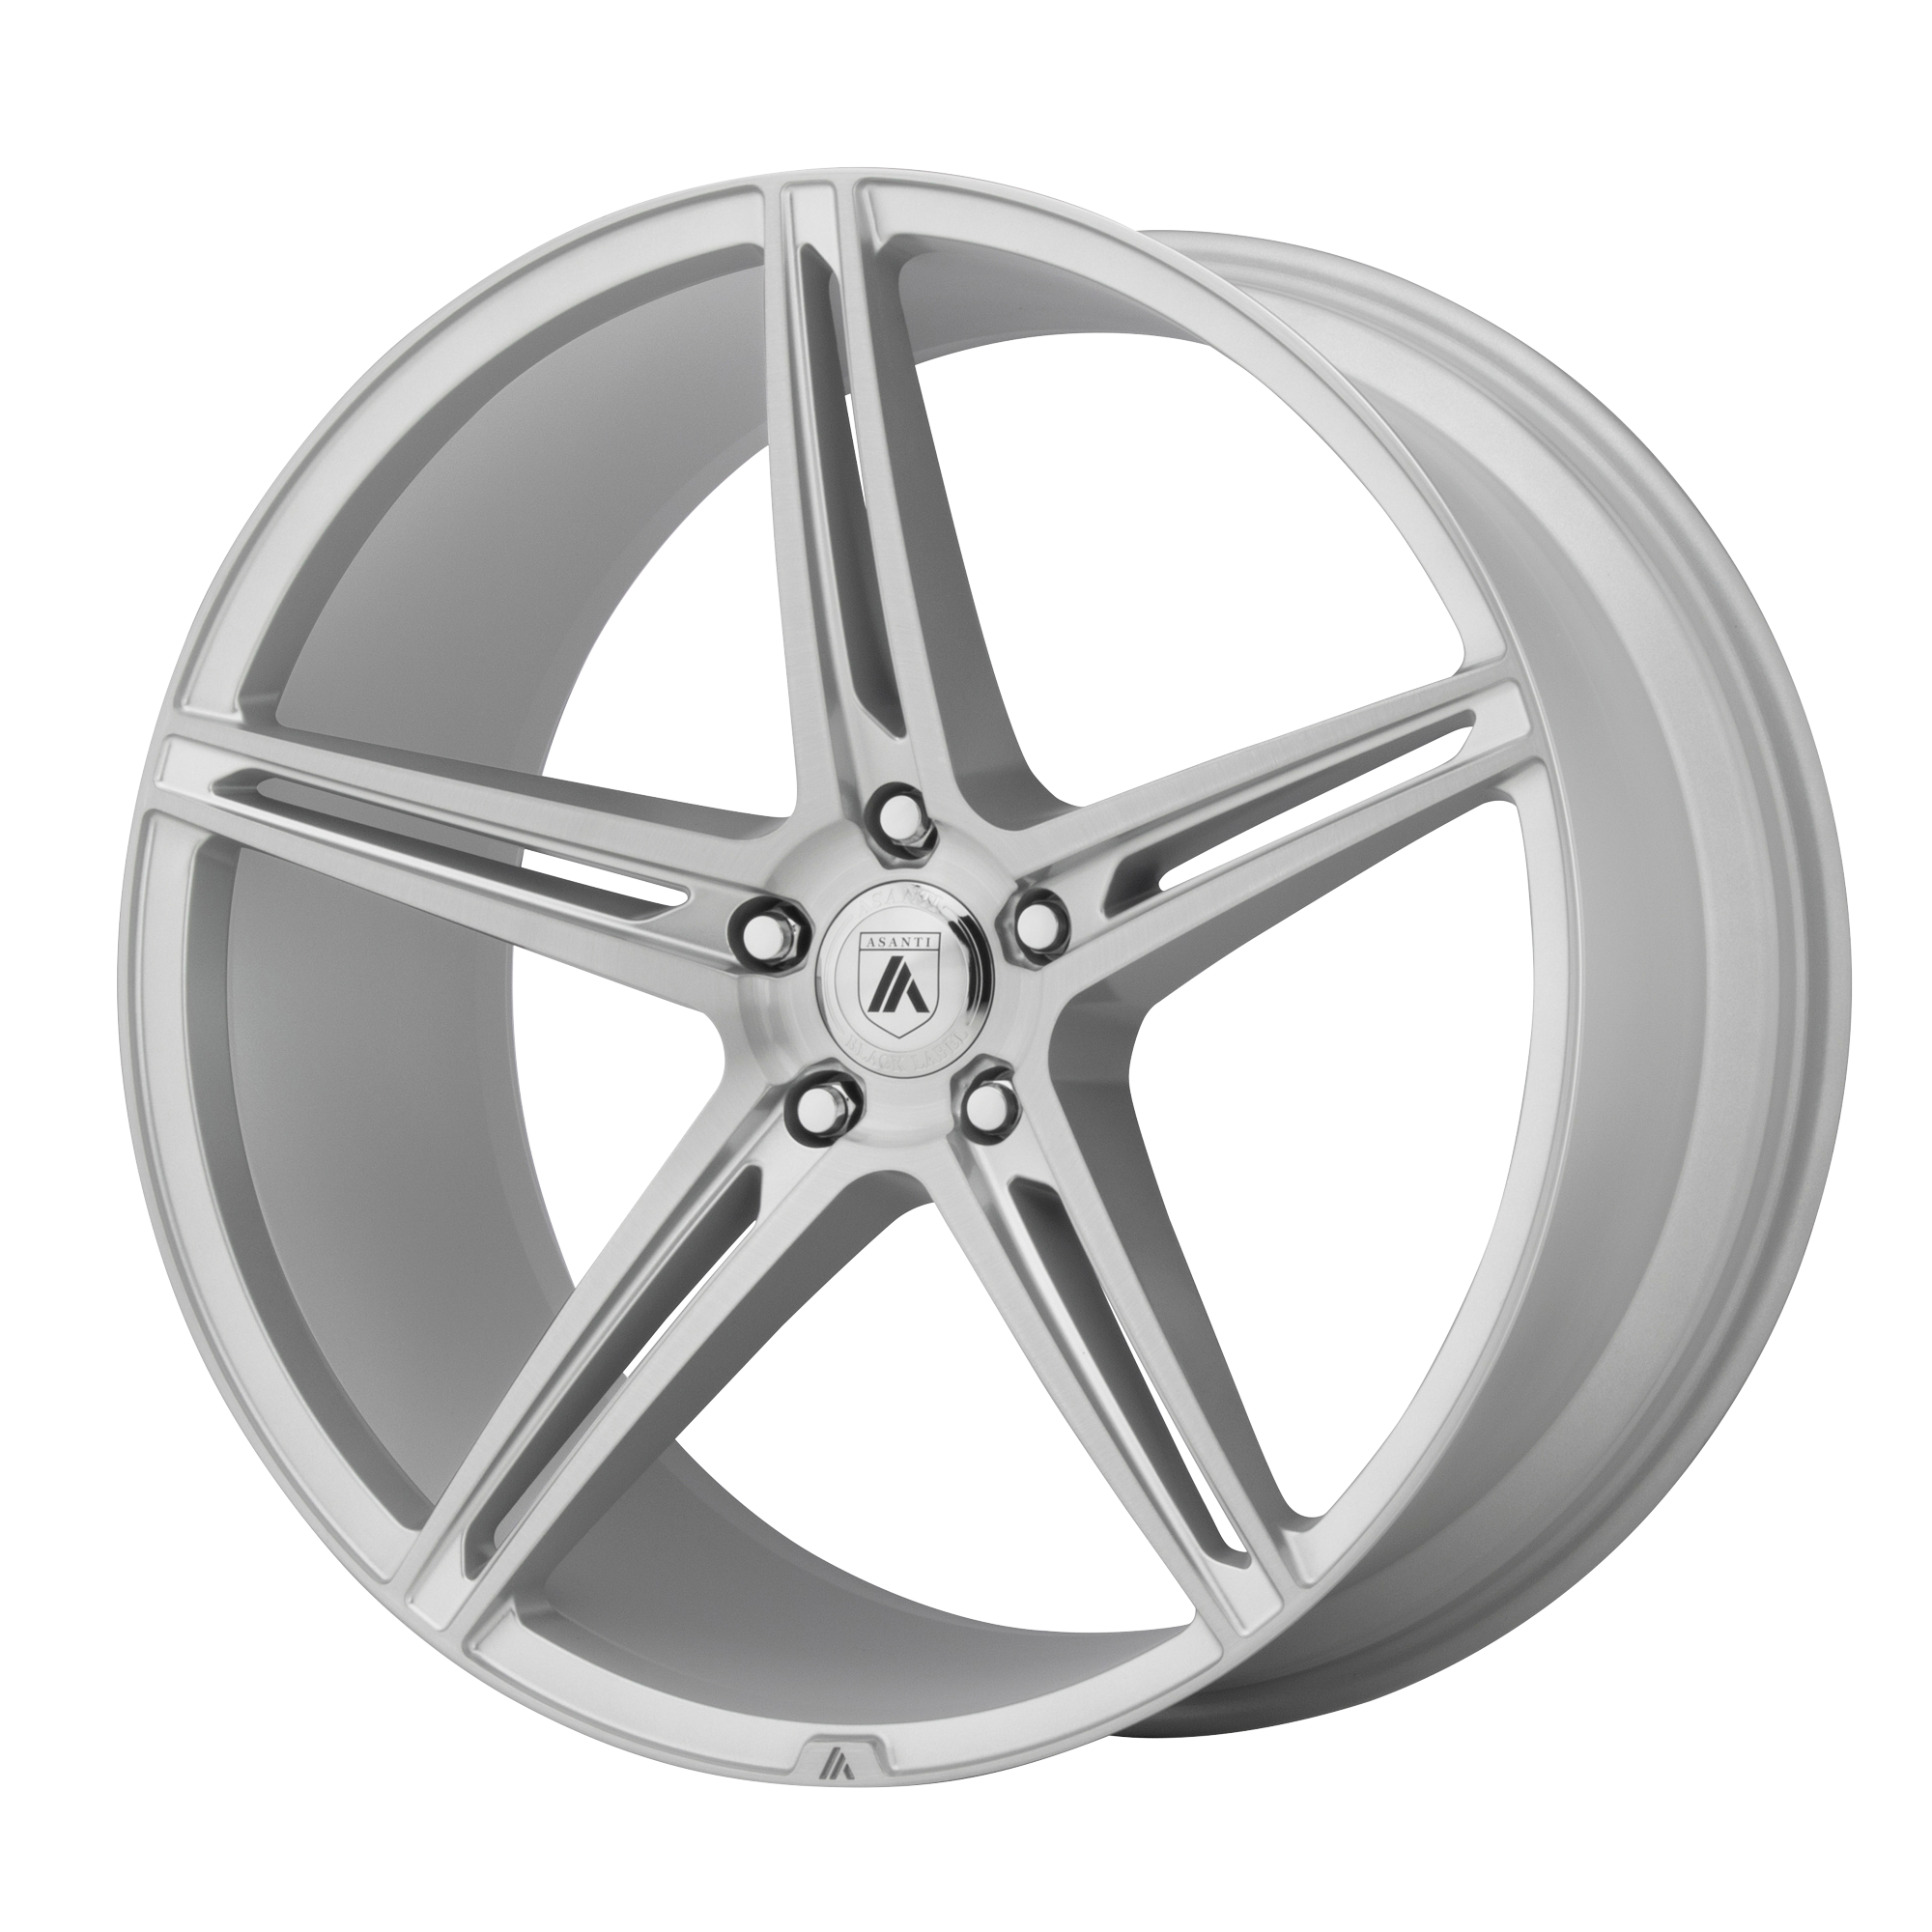 ALPHA 5 20x8.5 Blank BRUSHED SILVER (38 mm) - Tires and Engine Performance